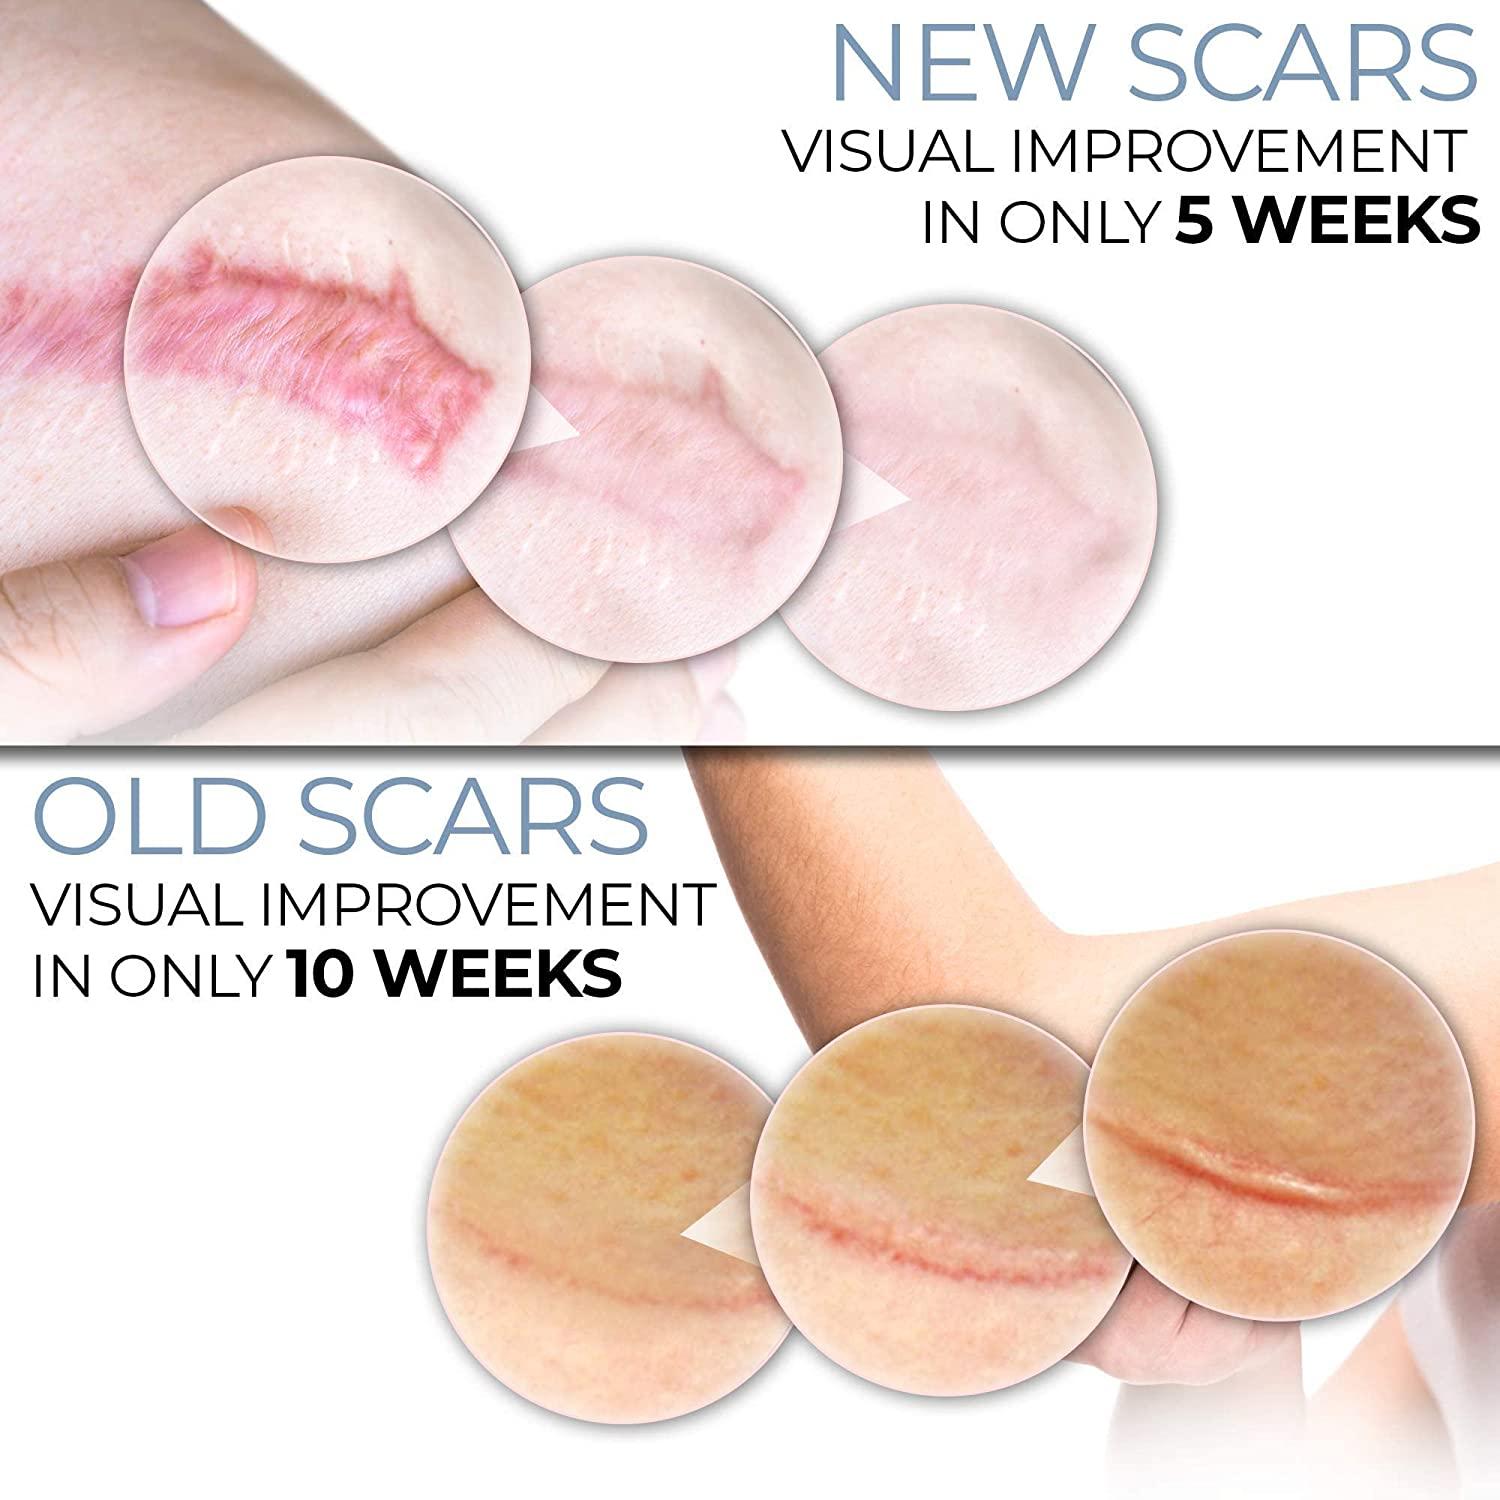 IS SILICONE SHEETING OR GEL BETTER FOR SCARS? - Scarless Canada